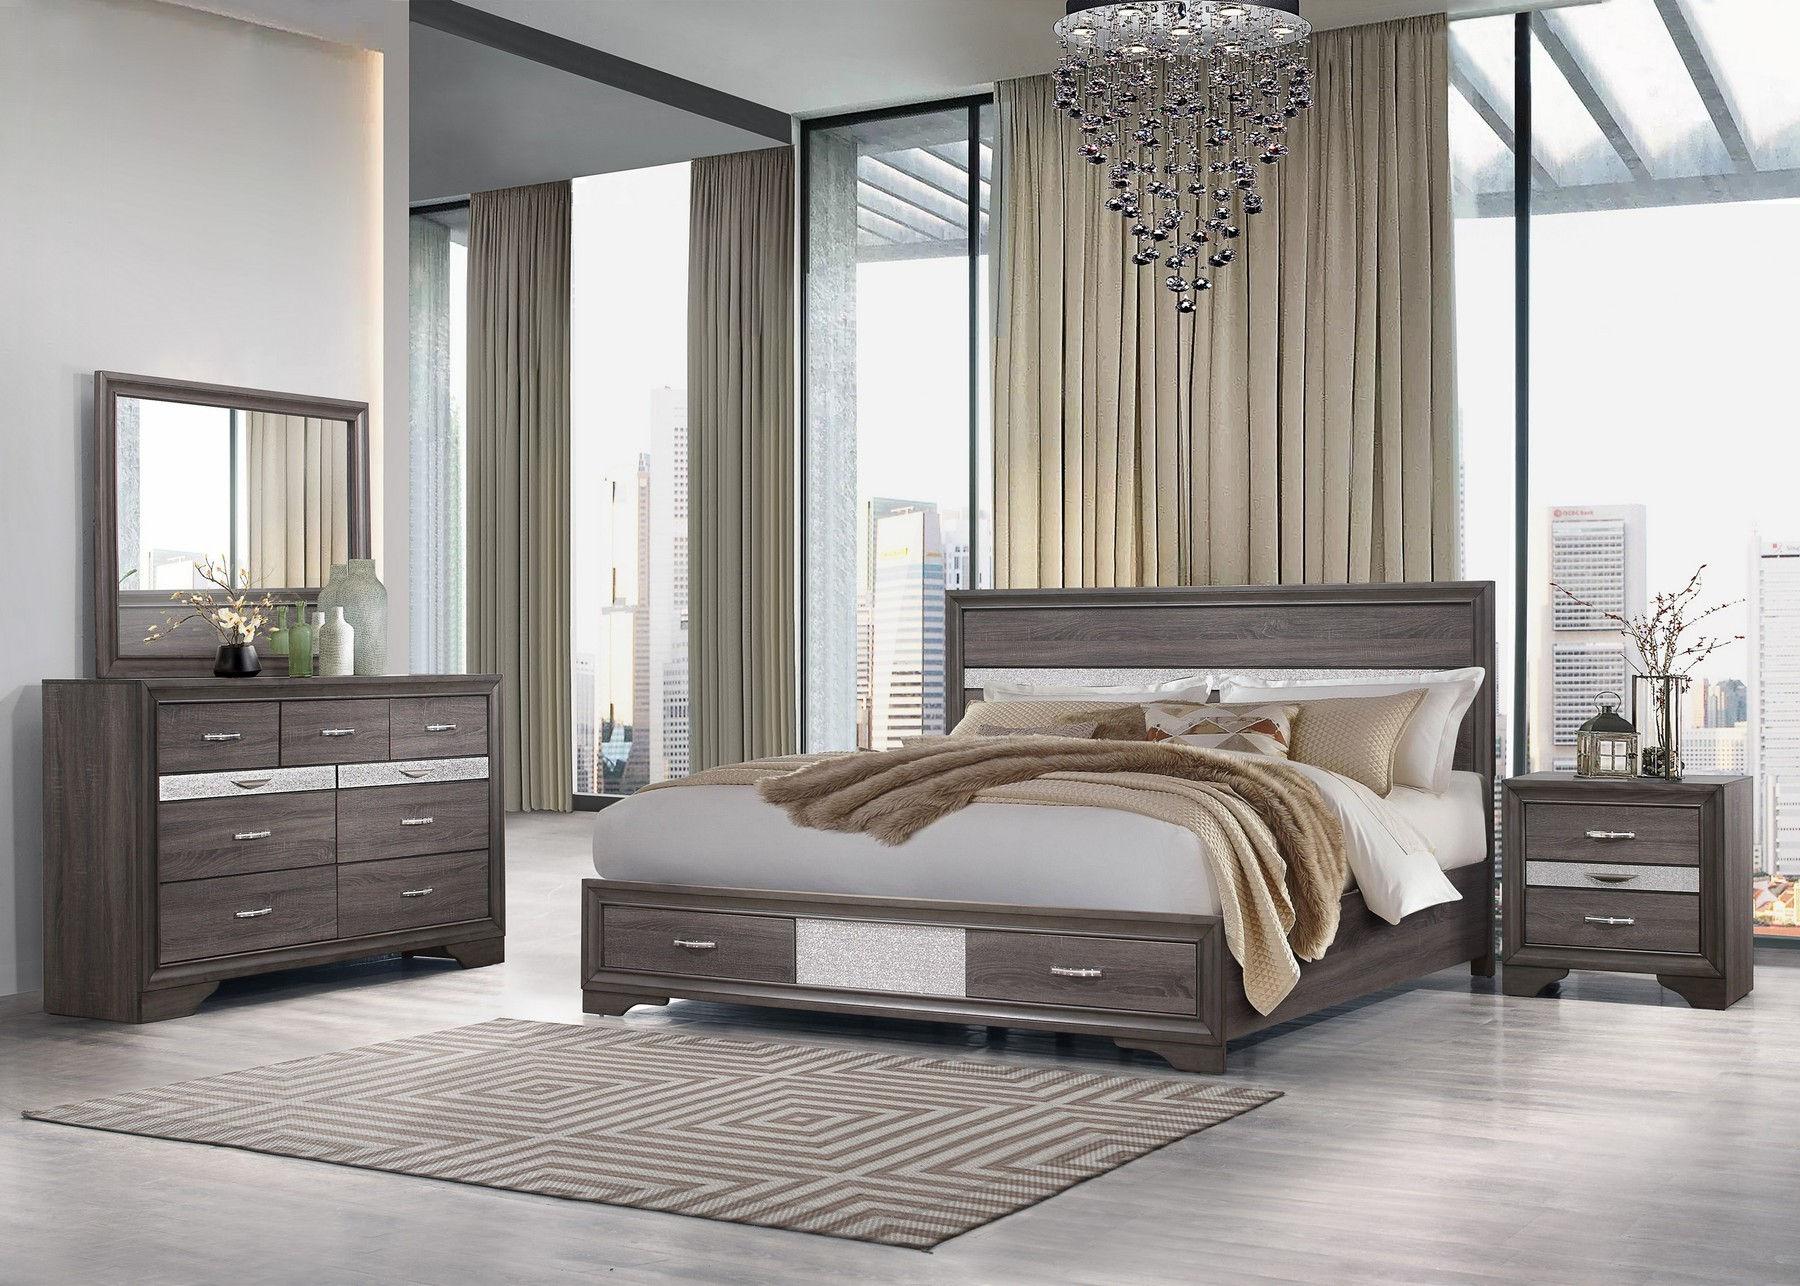 

    
SEVILLE Contemporary Storage Queen Bed Set 5Pcs in Weathered Grey Global US
